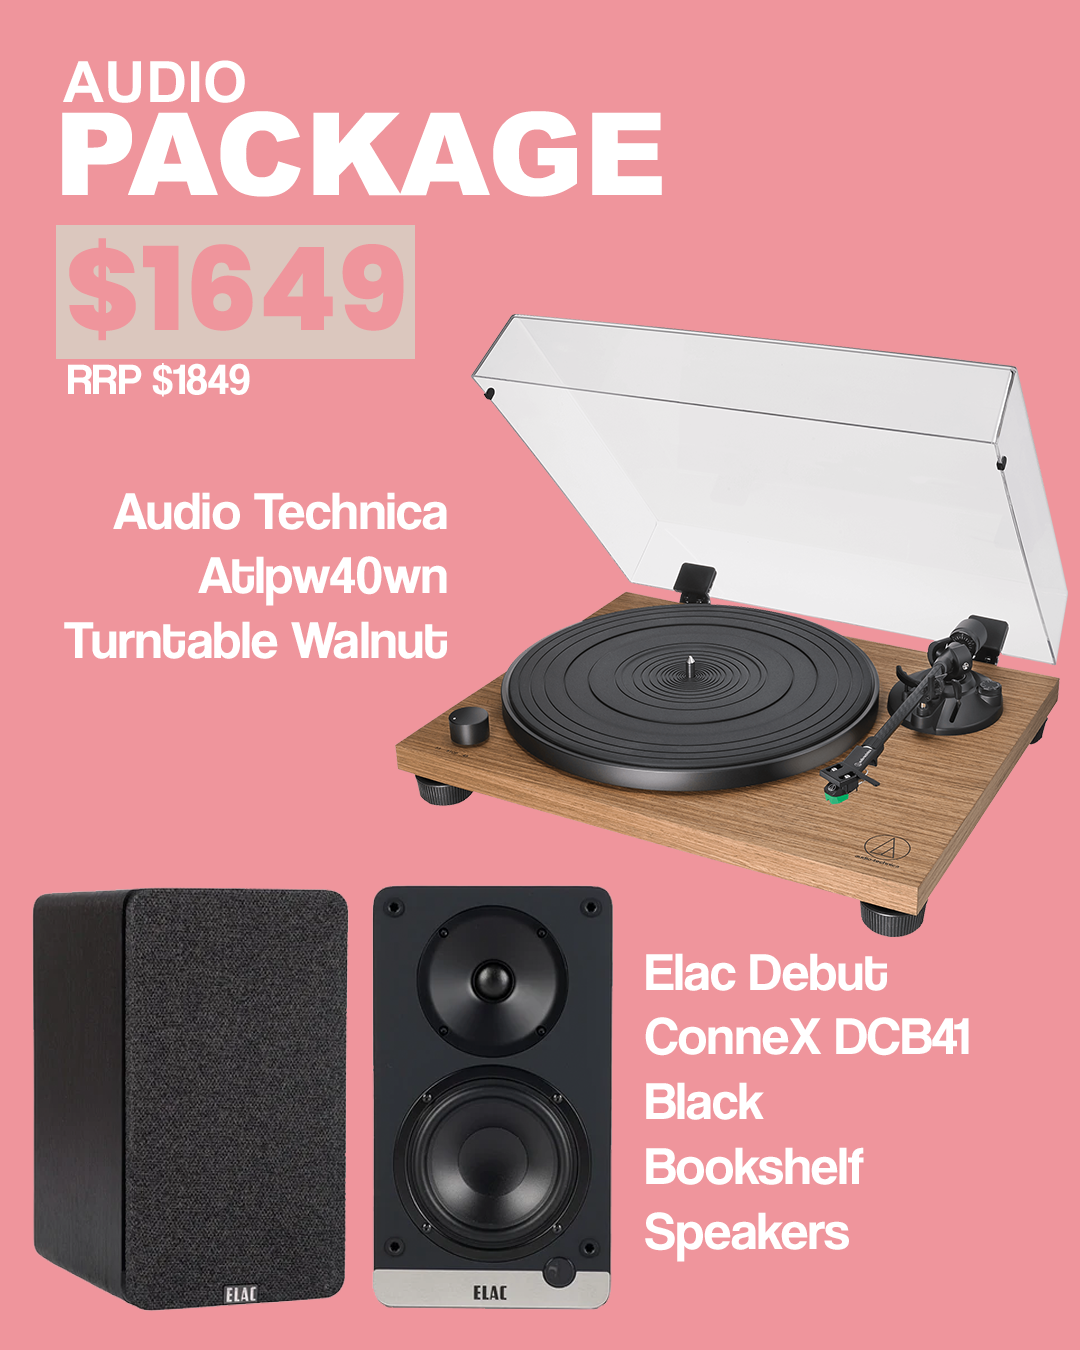 Audio Technica Atlpw40wn Turntable Walnut / Elac Debut Connex Dcb41 Black Package Deal